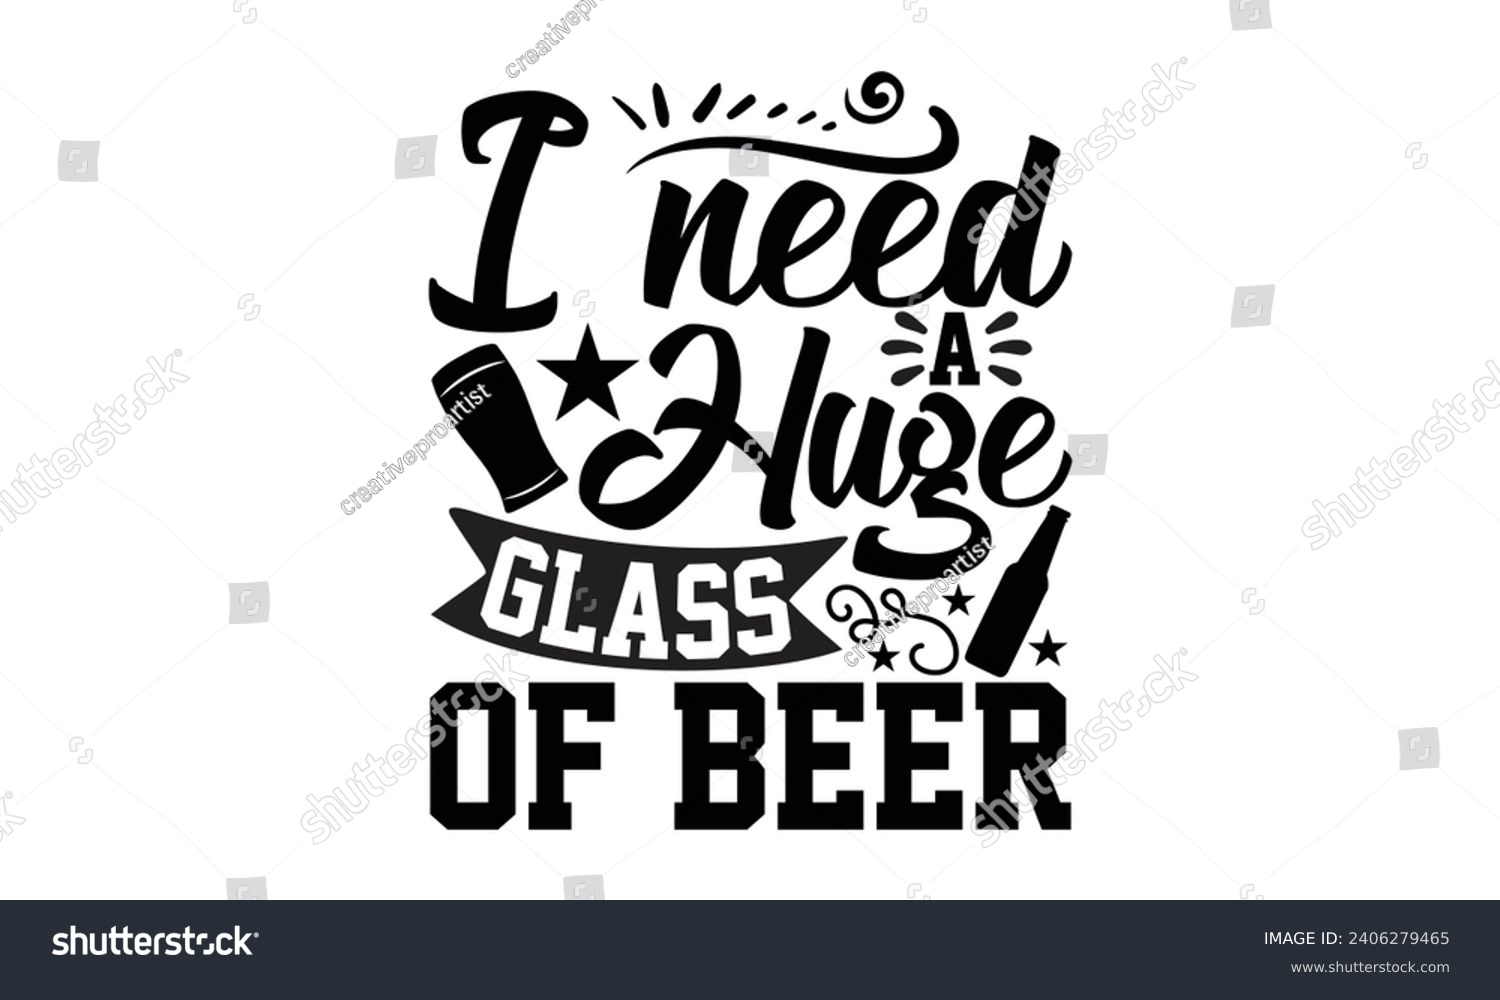 SVG of I Need A Huge Glass Of Beer- Beer t- shirt design, Handmade calligraphy vector illustration for Cutting Machine, Silhouette Cameo, Cricut, Vector illustration Template. svg